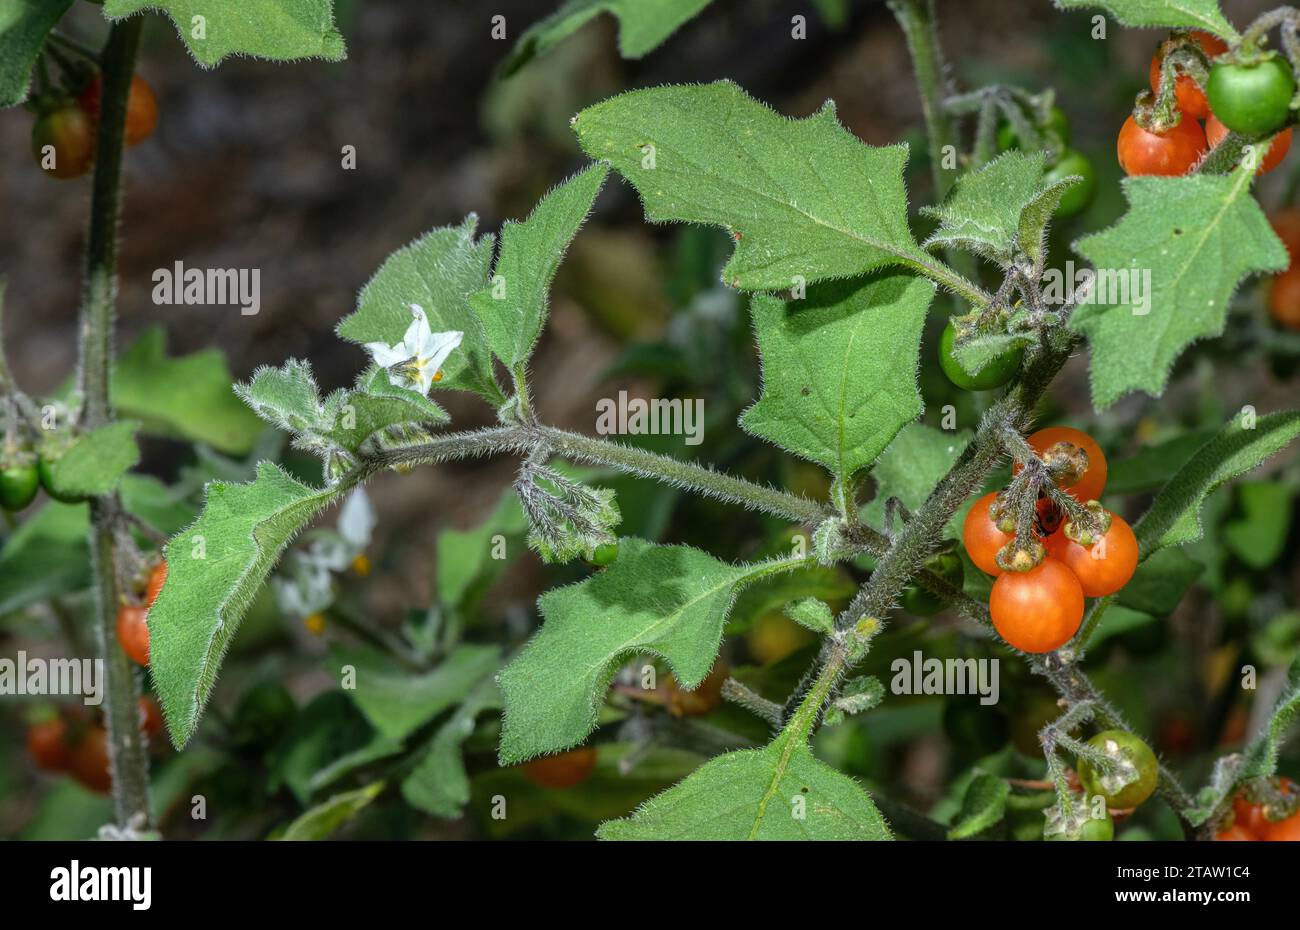 Hairy nightshade, Solanum villosum, in flower and fruit. Widespread annual weed. Stock Photo